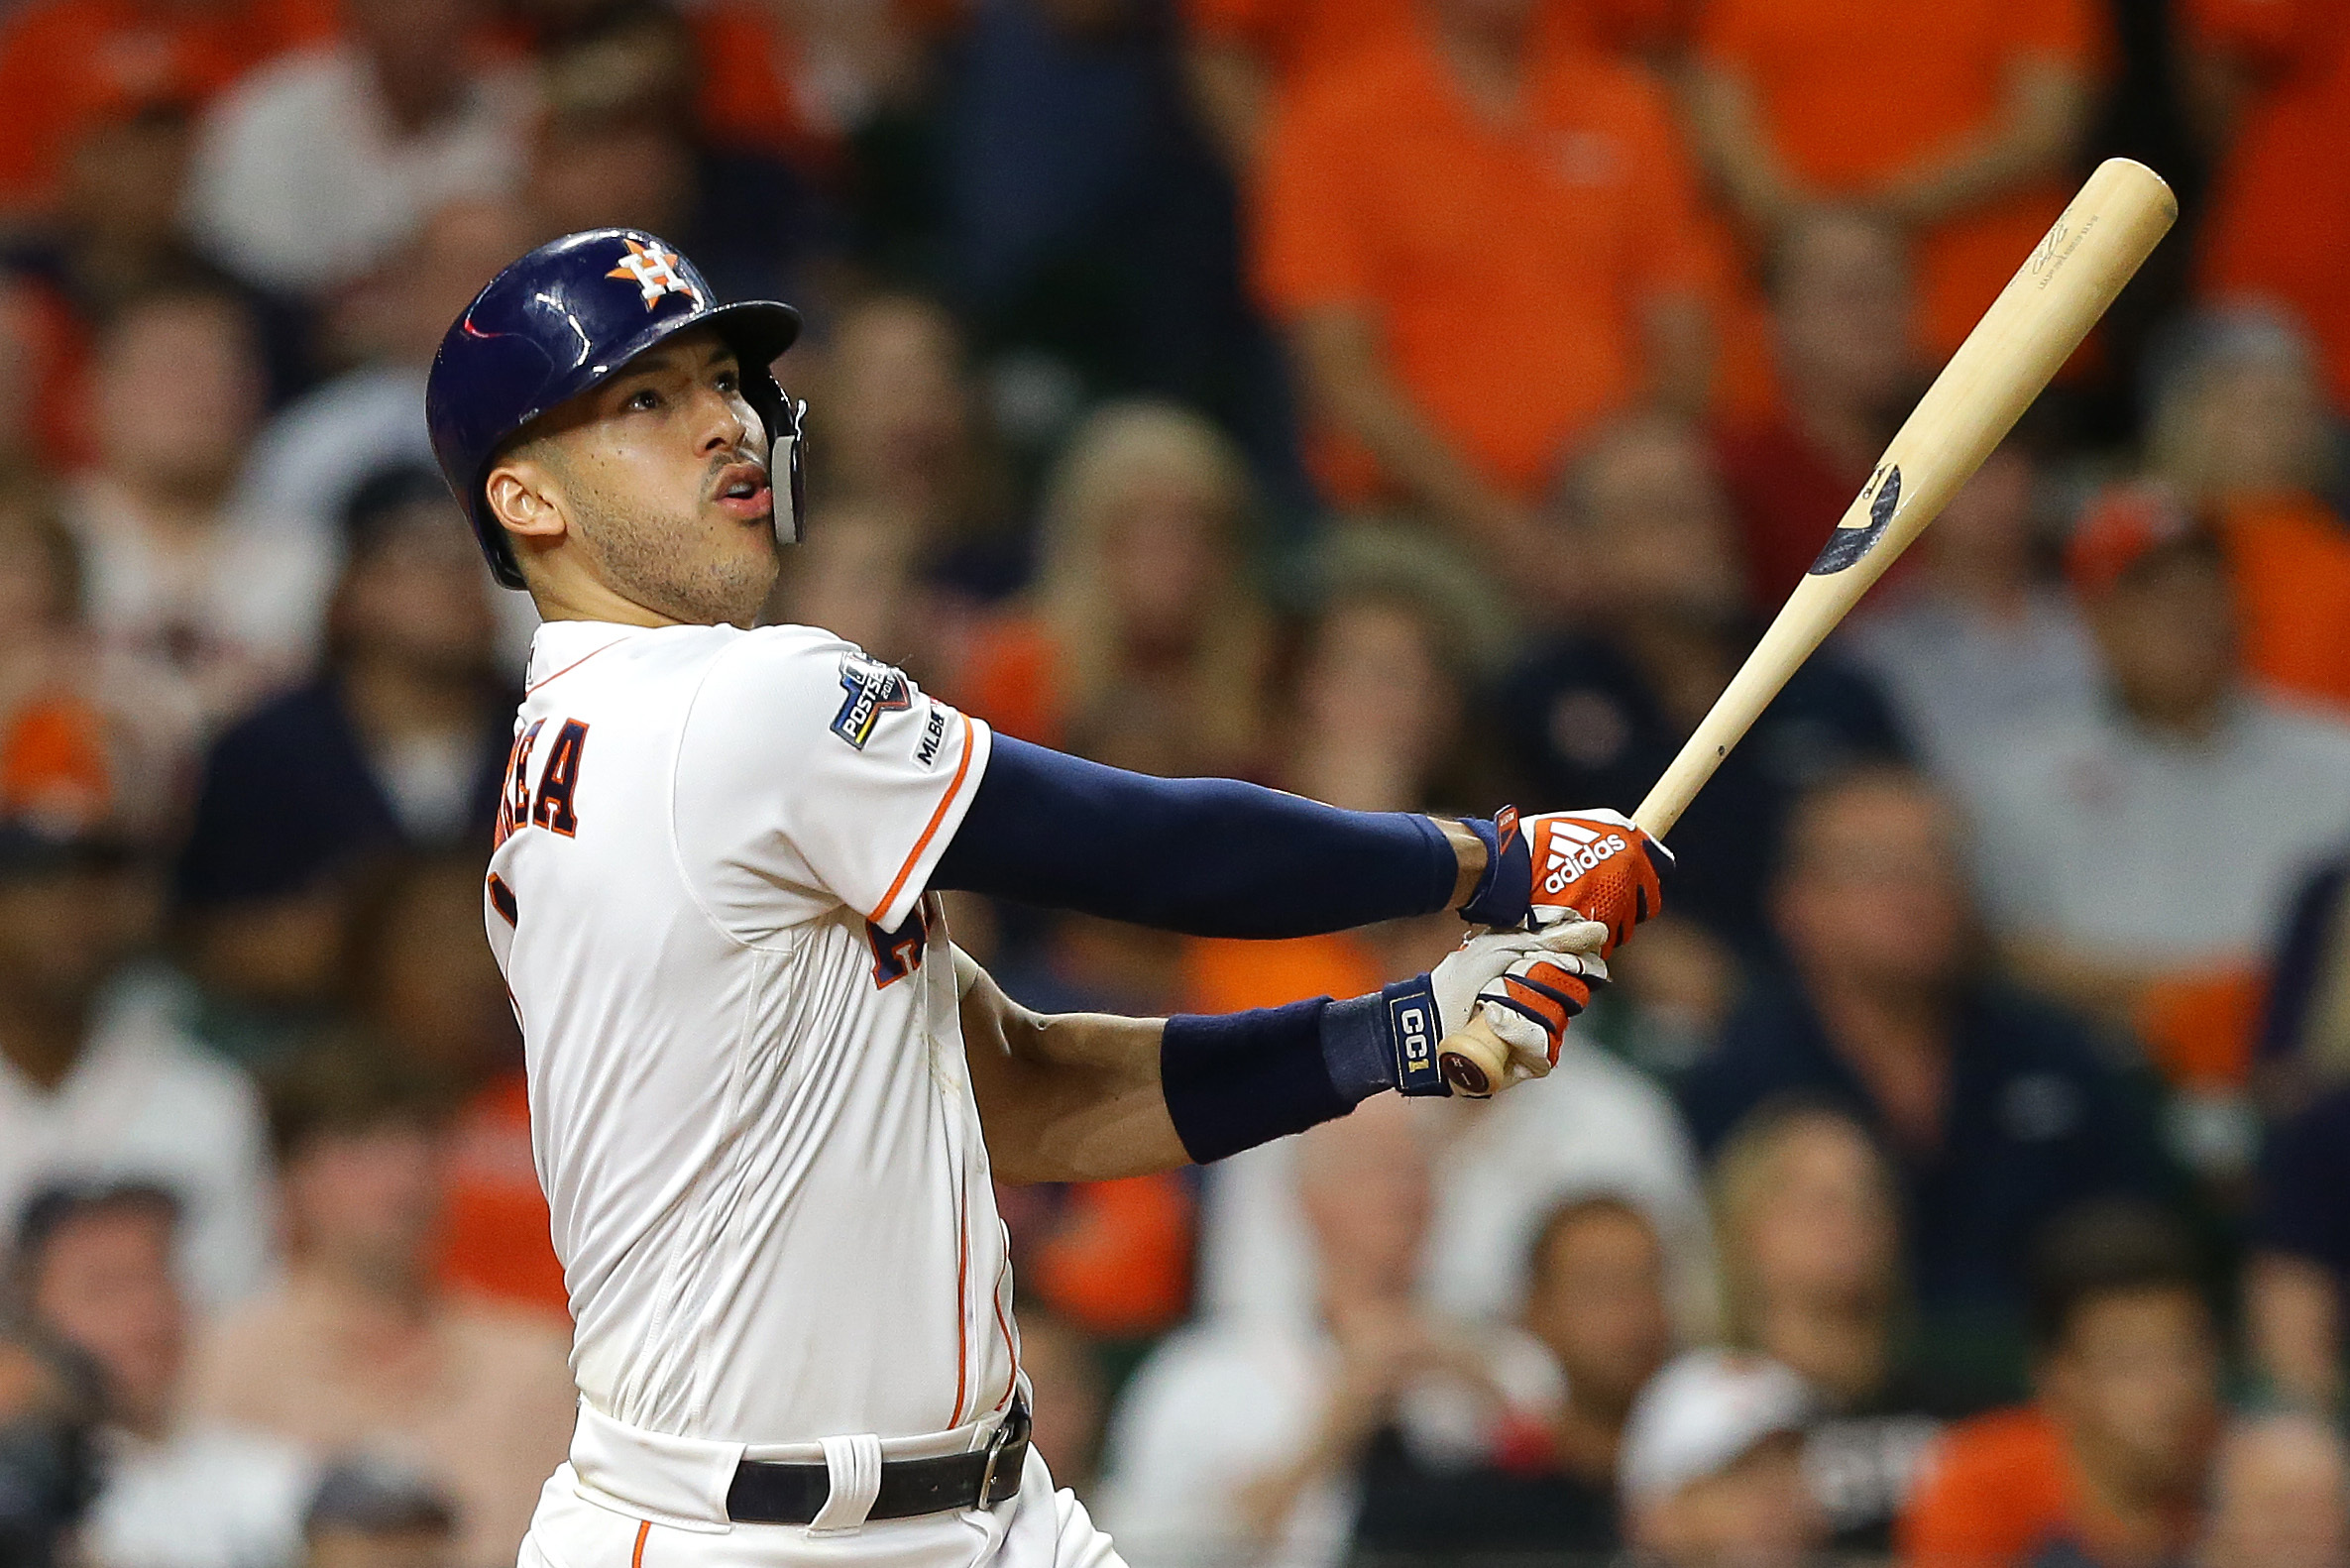 Carlos Correa of the Puerto Rico watches his two-run home run to